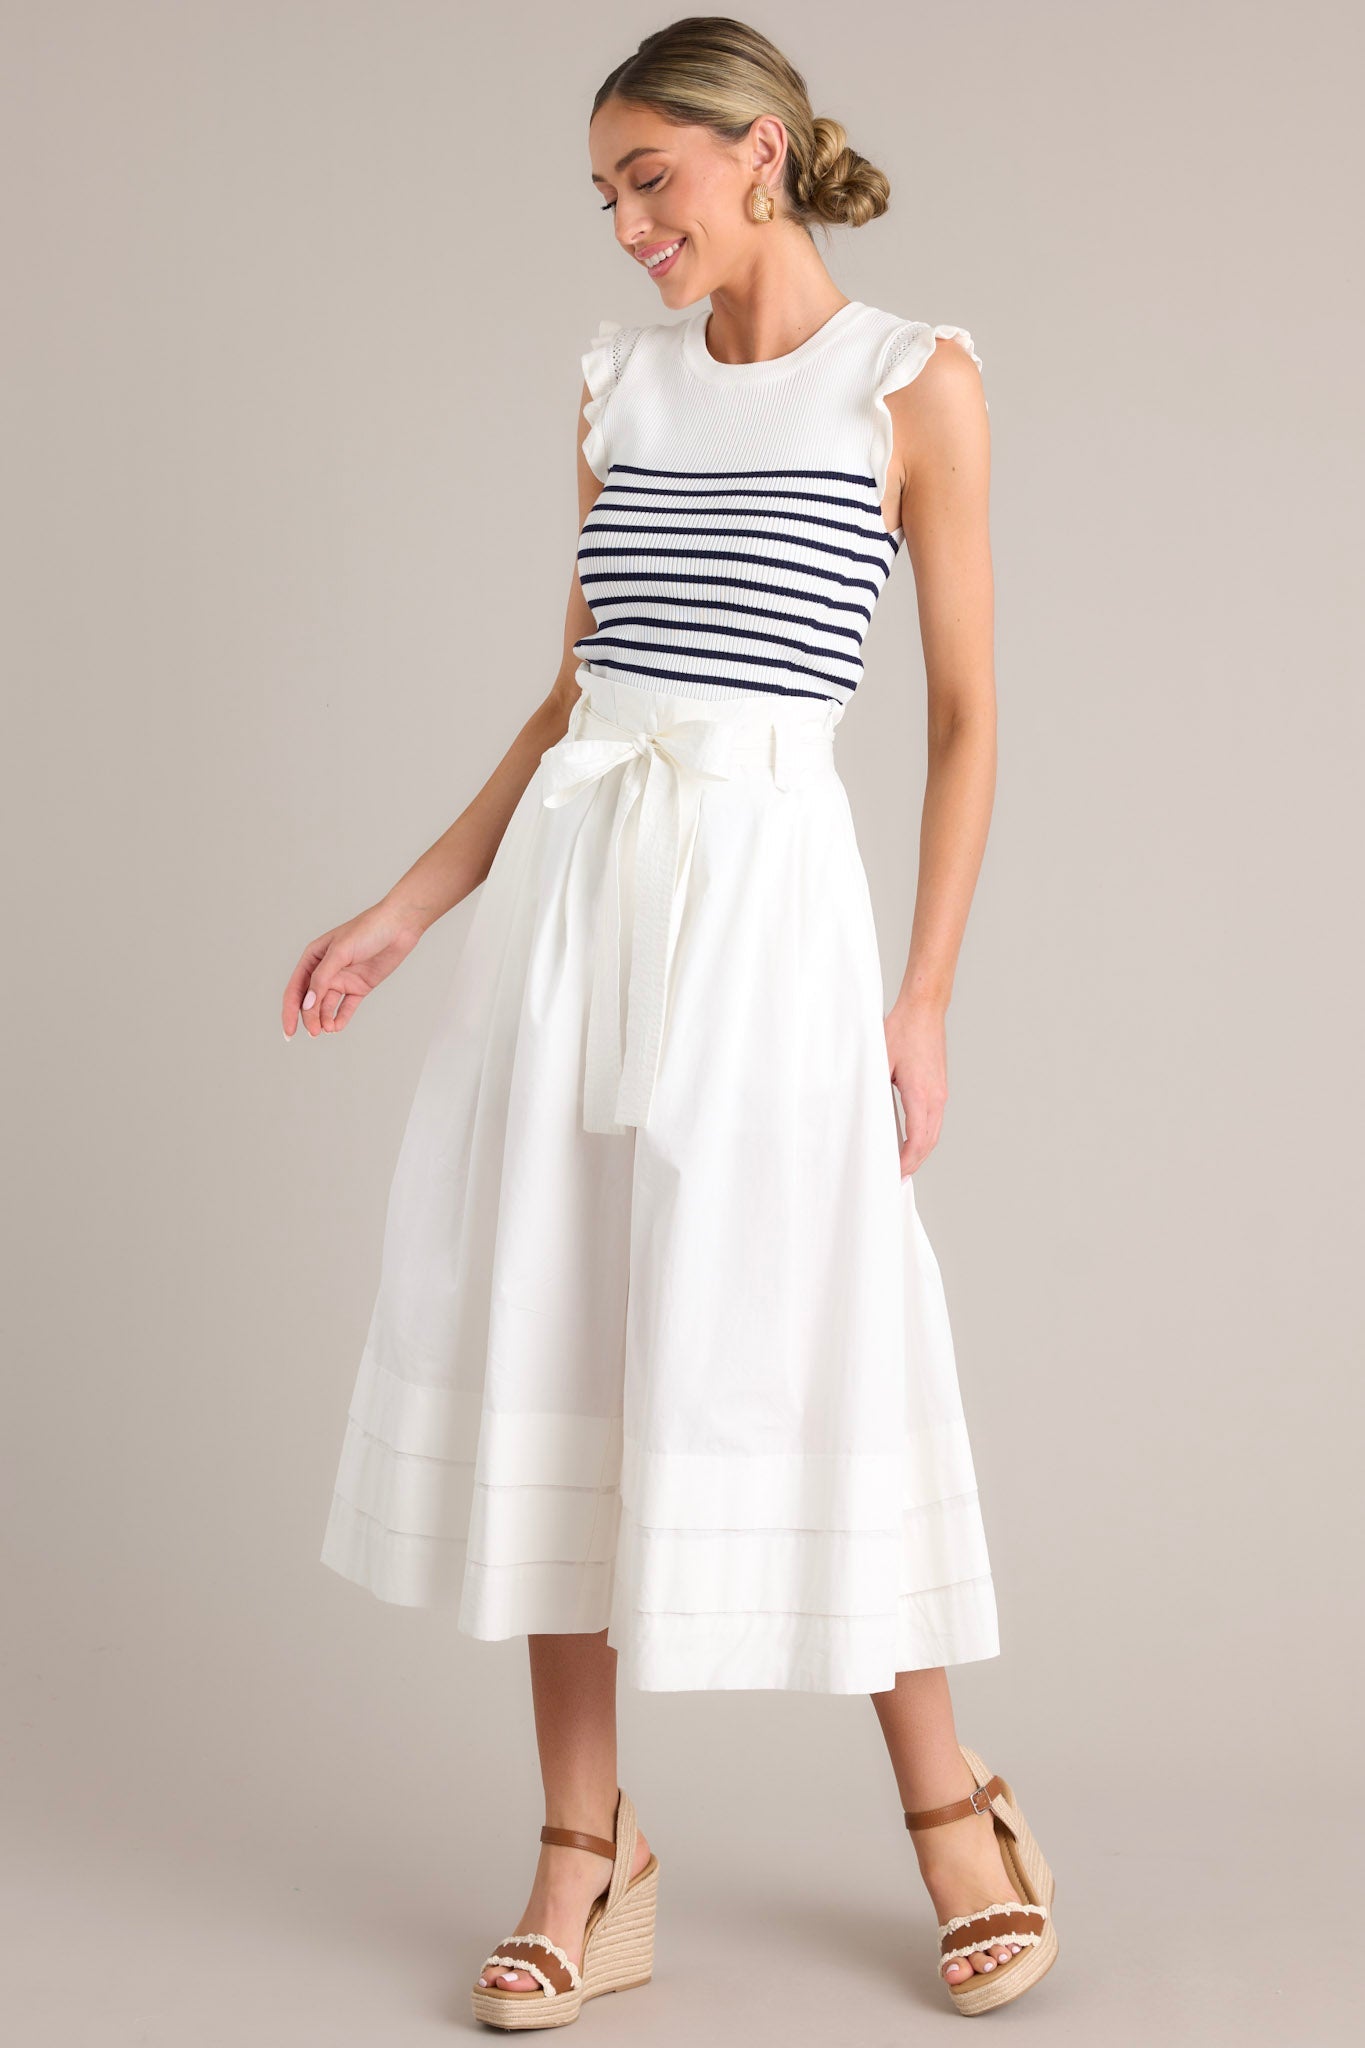 Full length view of a white & navy striped top with a ribbed crew neckline, horizontal stripes, stretchy knit fabric, and flutter sleeves